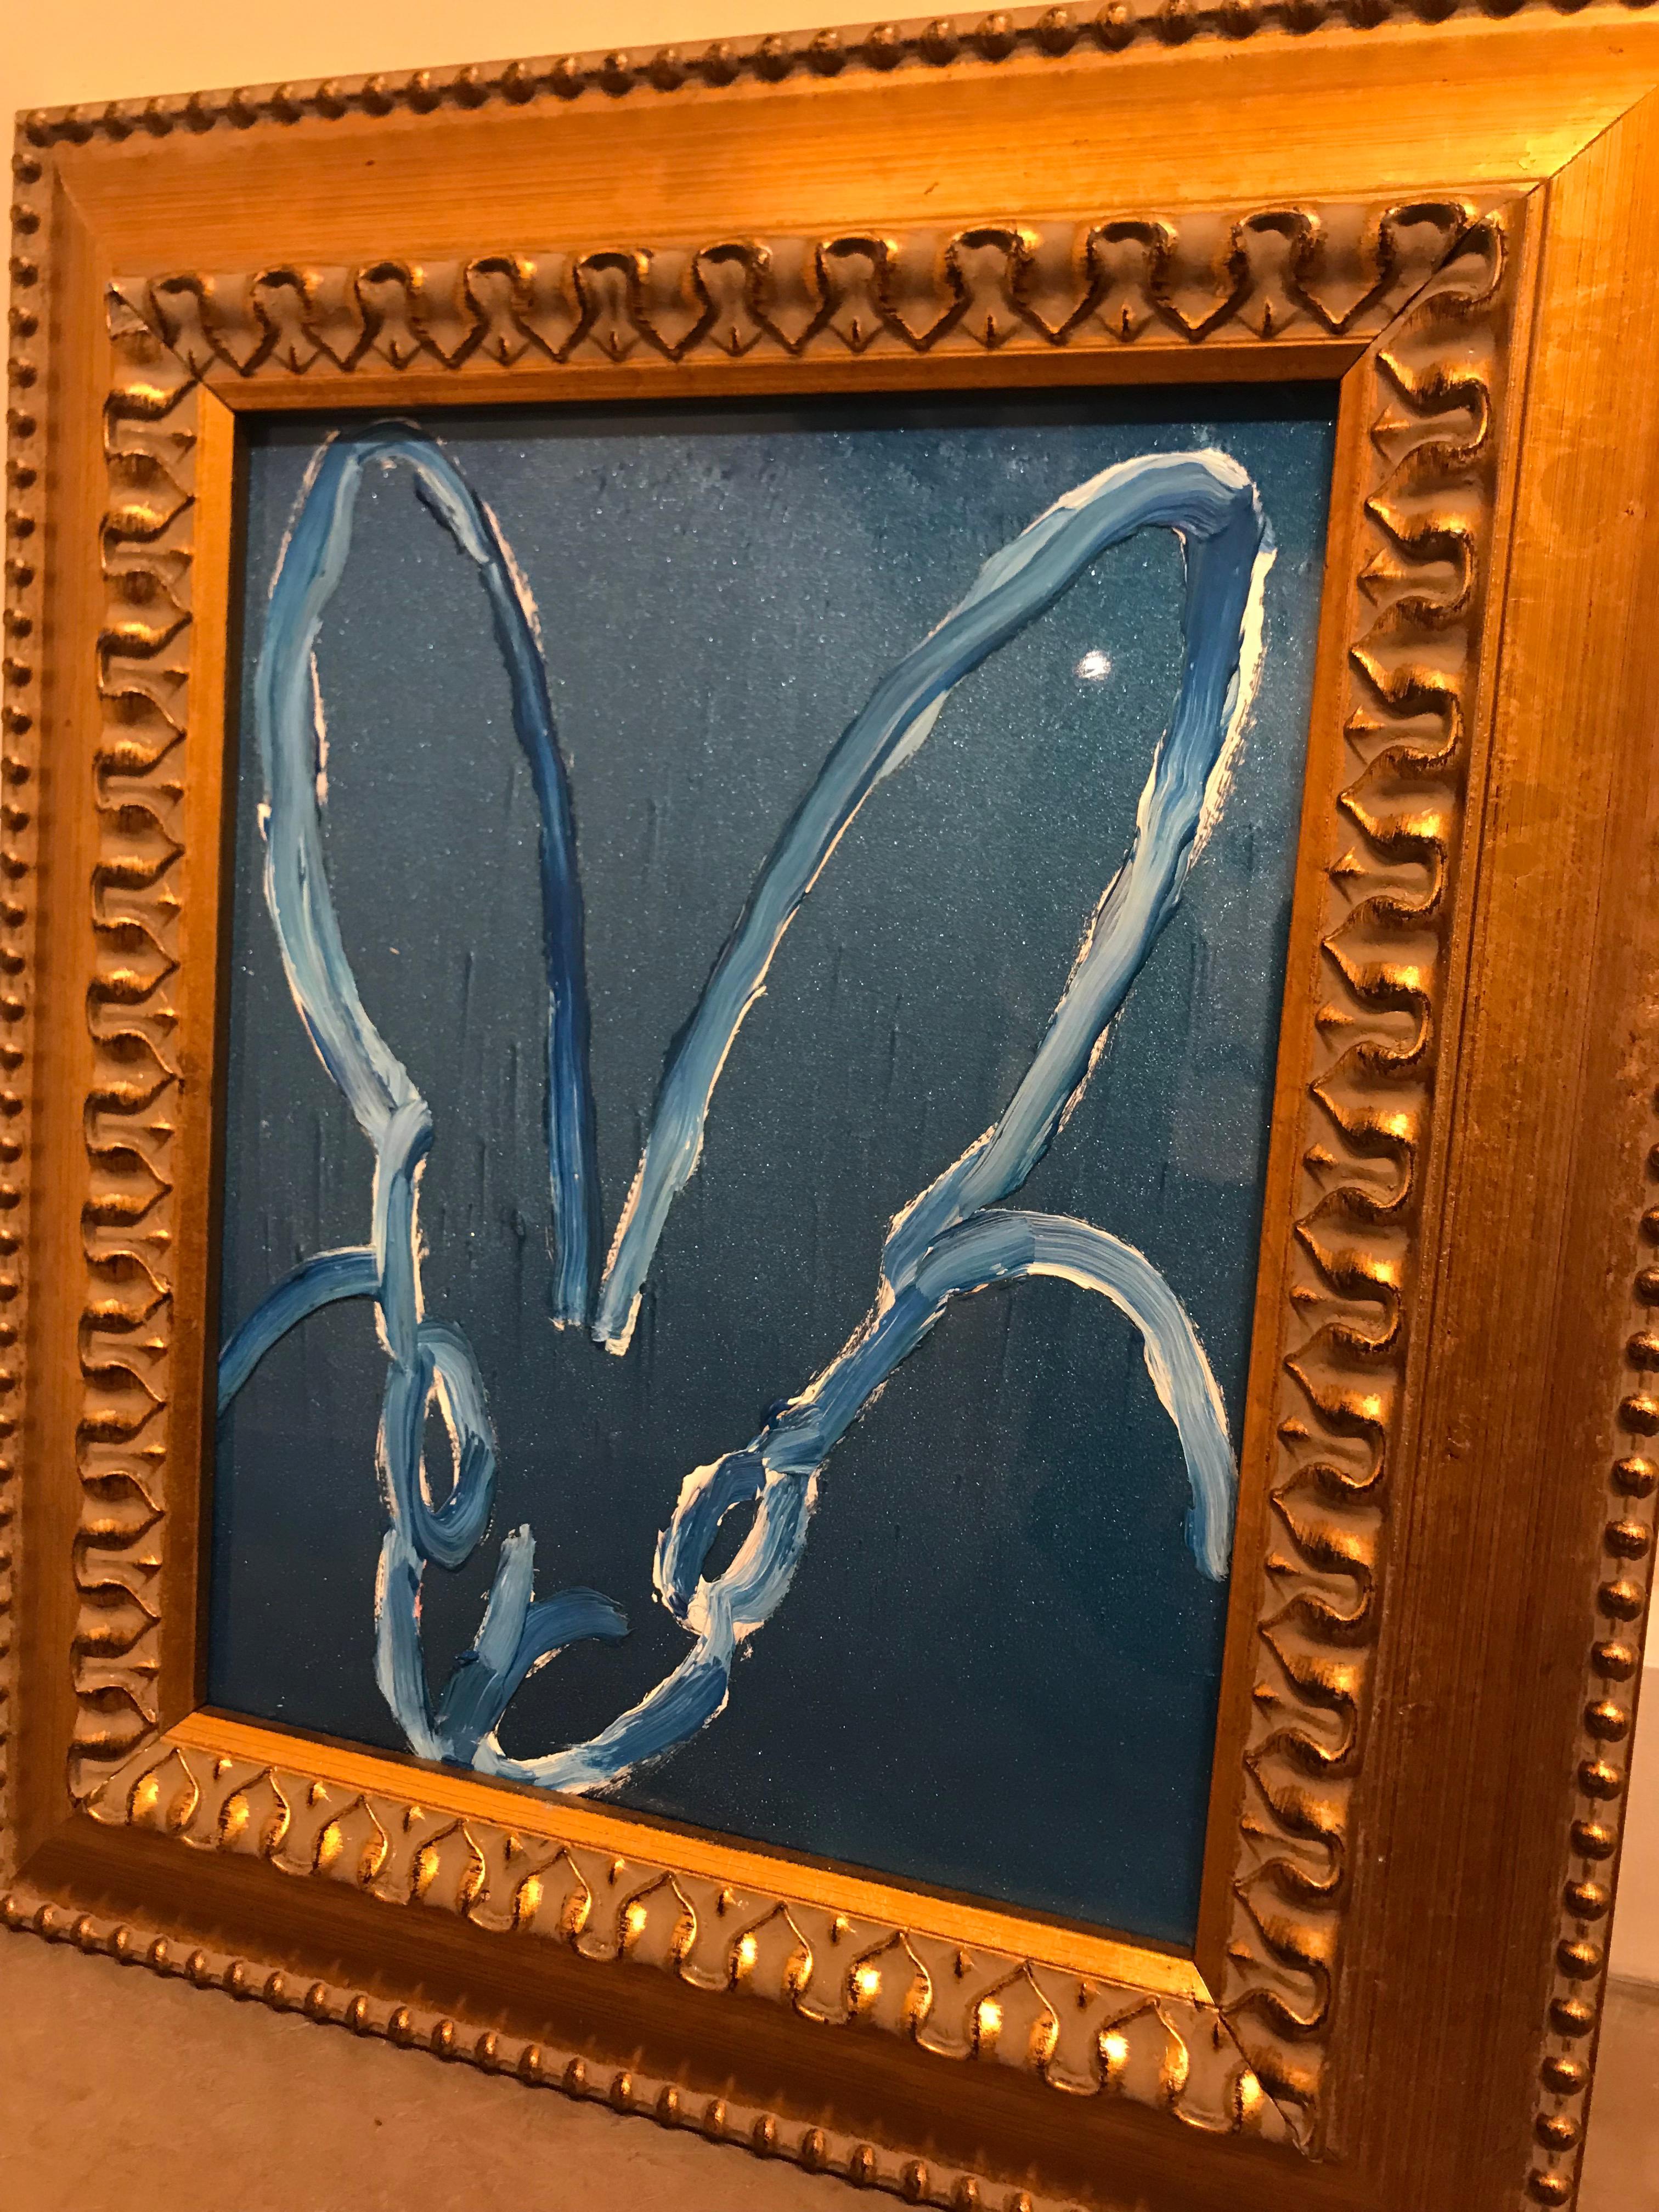 Untitled  Bunny -framed blue high gloss pearl oil painting with resin - Painting by Hunt Slonem